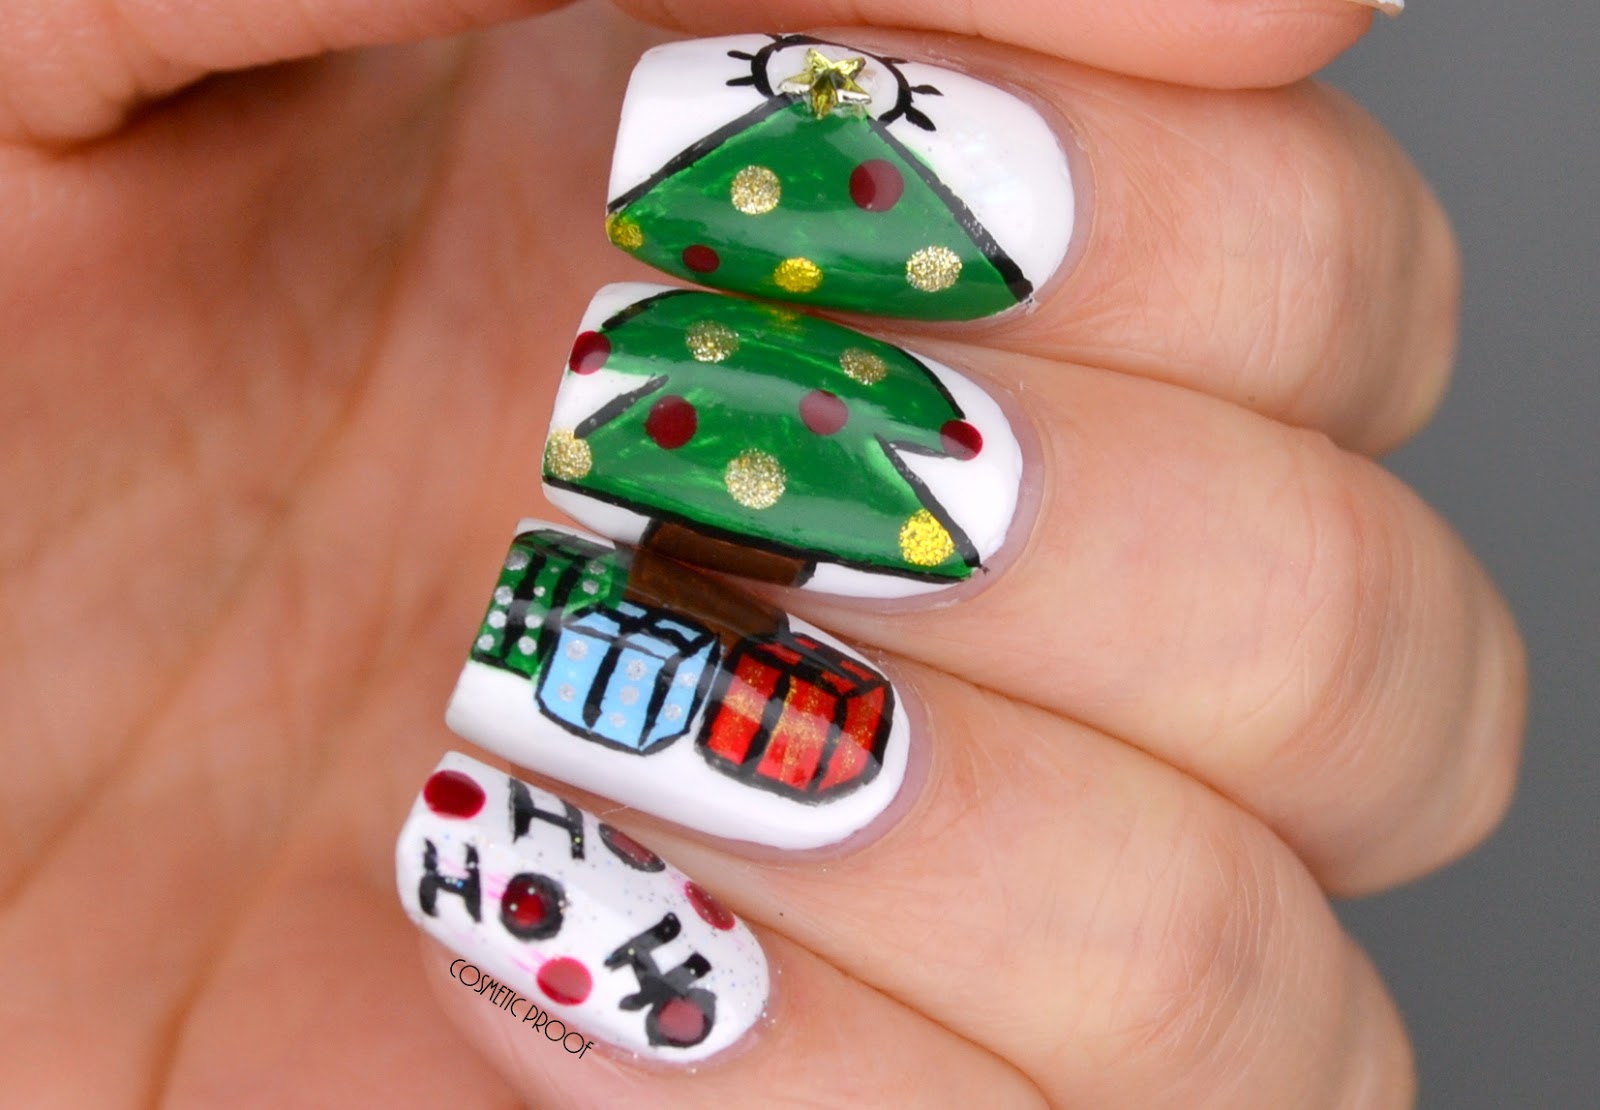 4. "Christmas Tree Nails" - wide 5